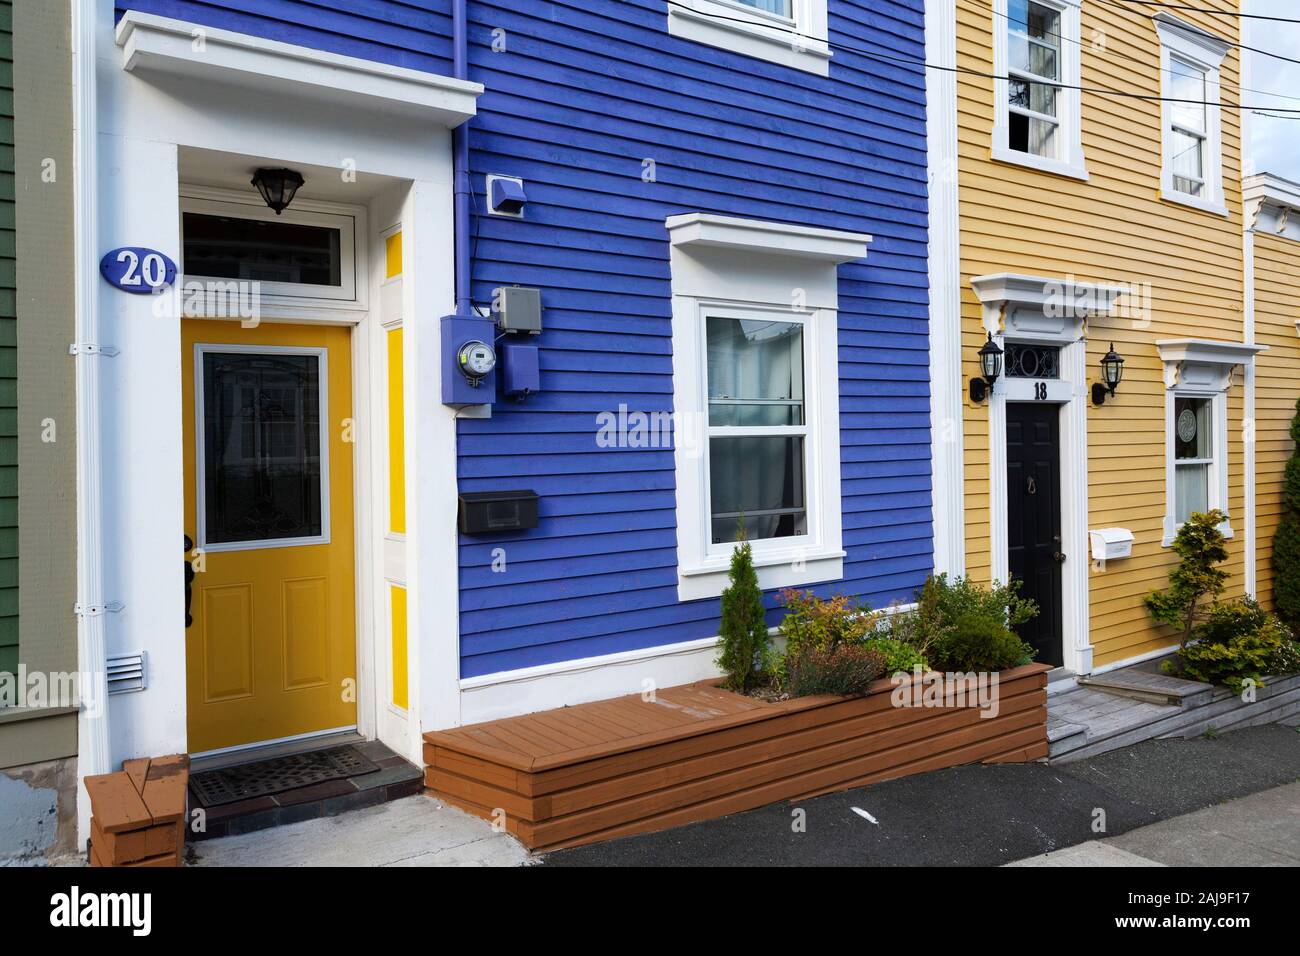 Facades colourful houses in St John's, Newfoundland and Labrador, Canada. Plants thrive outside of the buildings. Stock Photo